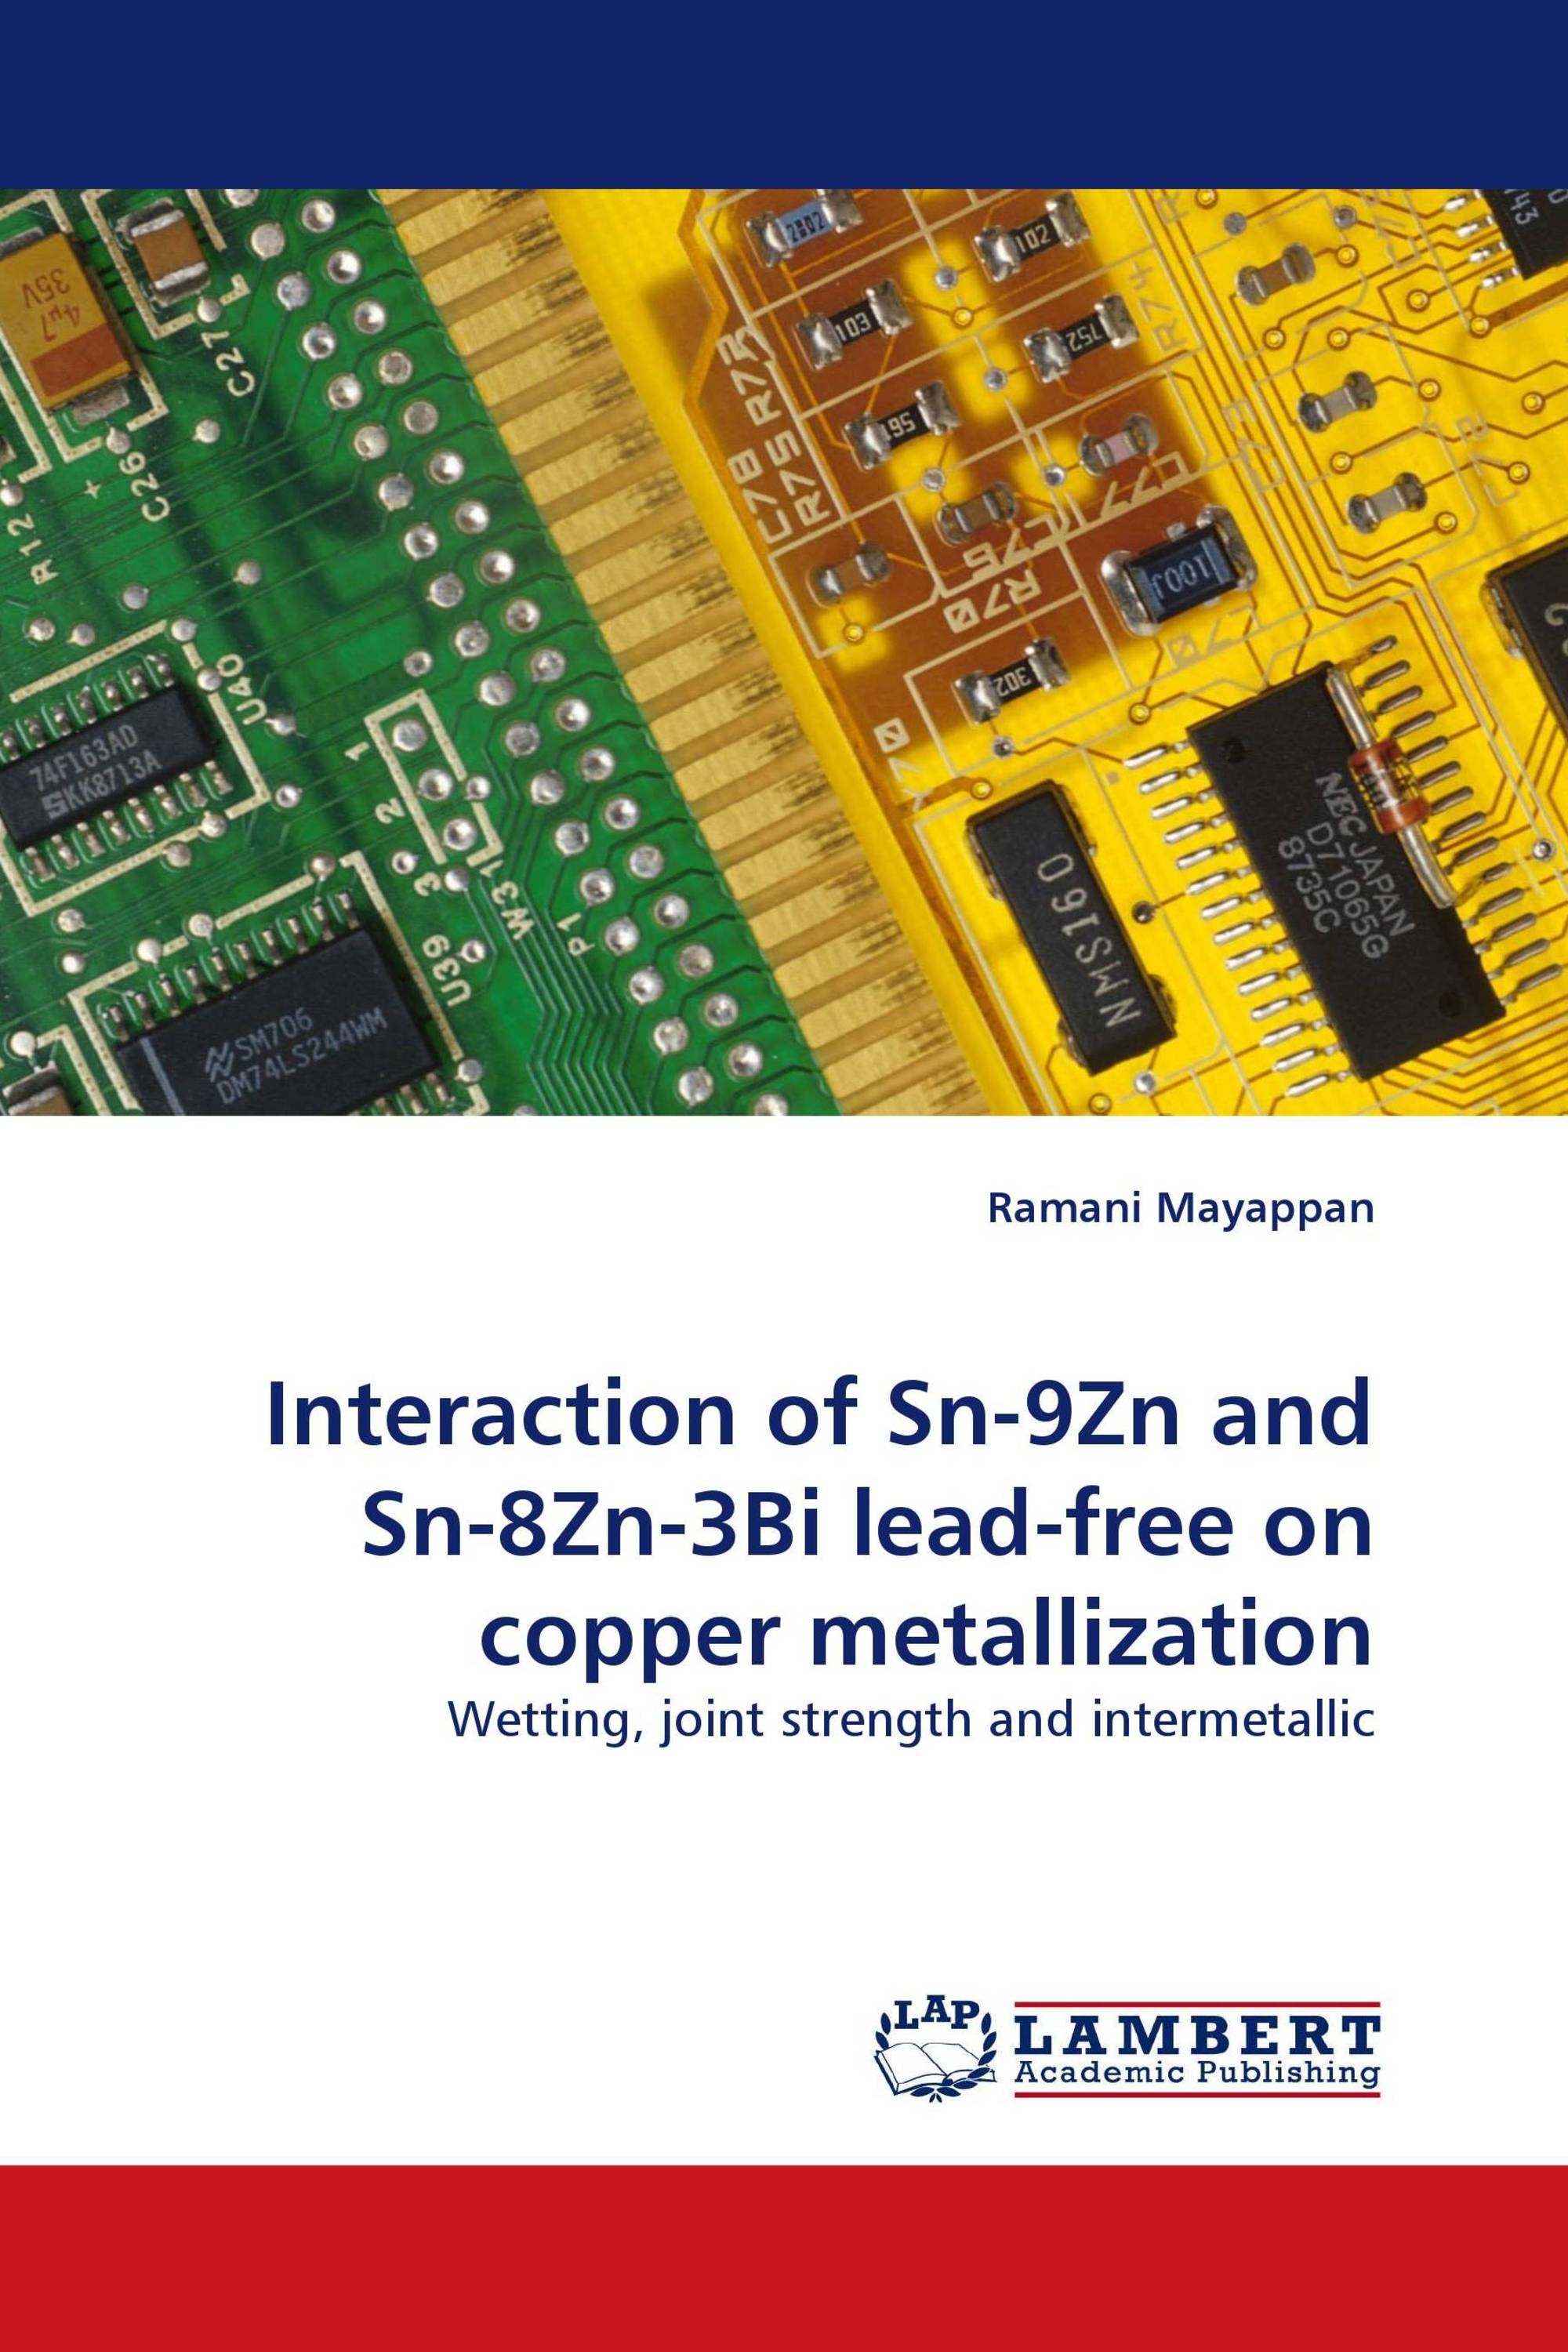 Interaction of Sn-9Zn and Sn-8Zn-3Bi lead-free on copper metallization